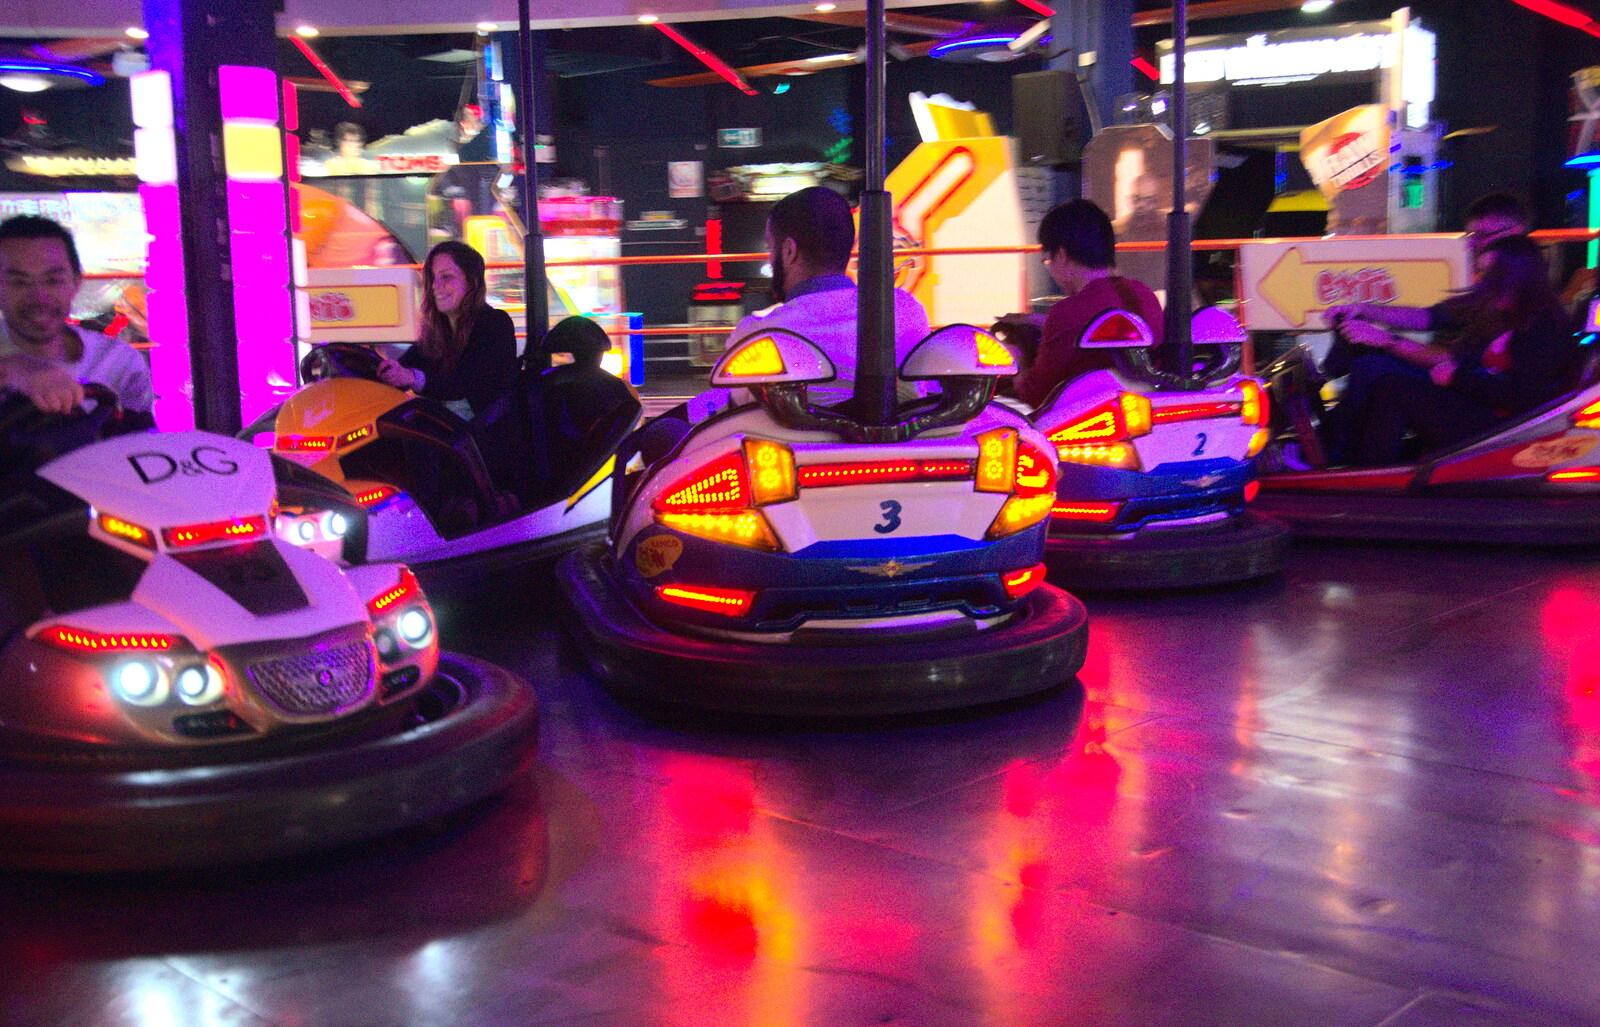 Red lights on the dodgems from A Team Outing at Namco Funscape, South Bank, London - 27th March 2019